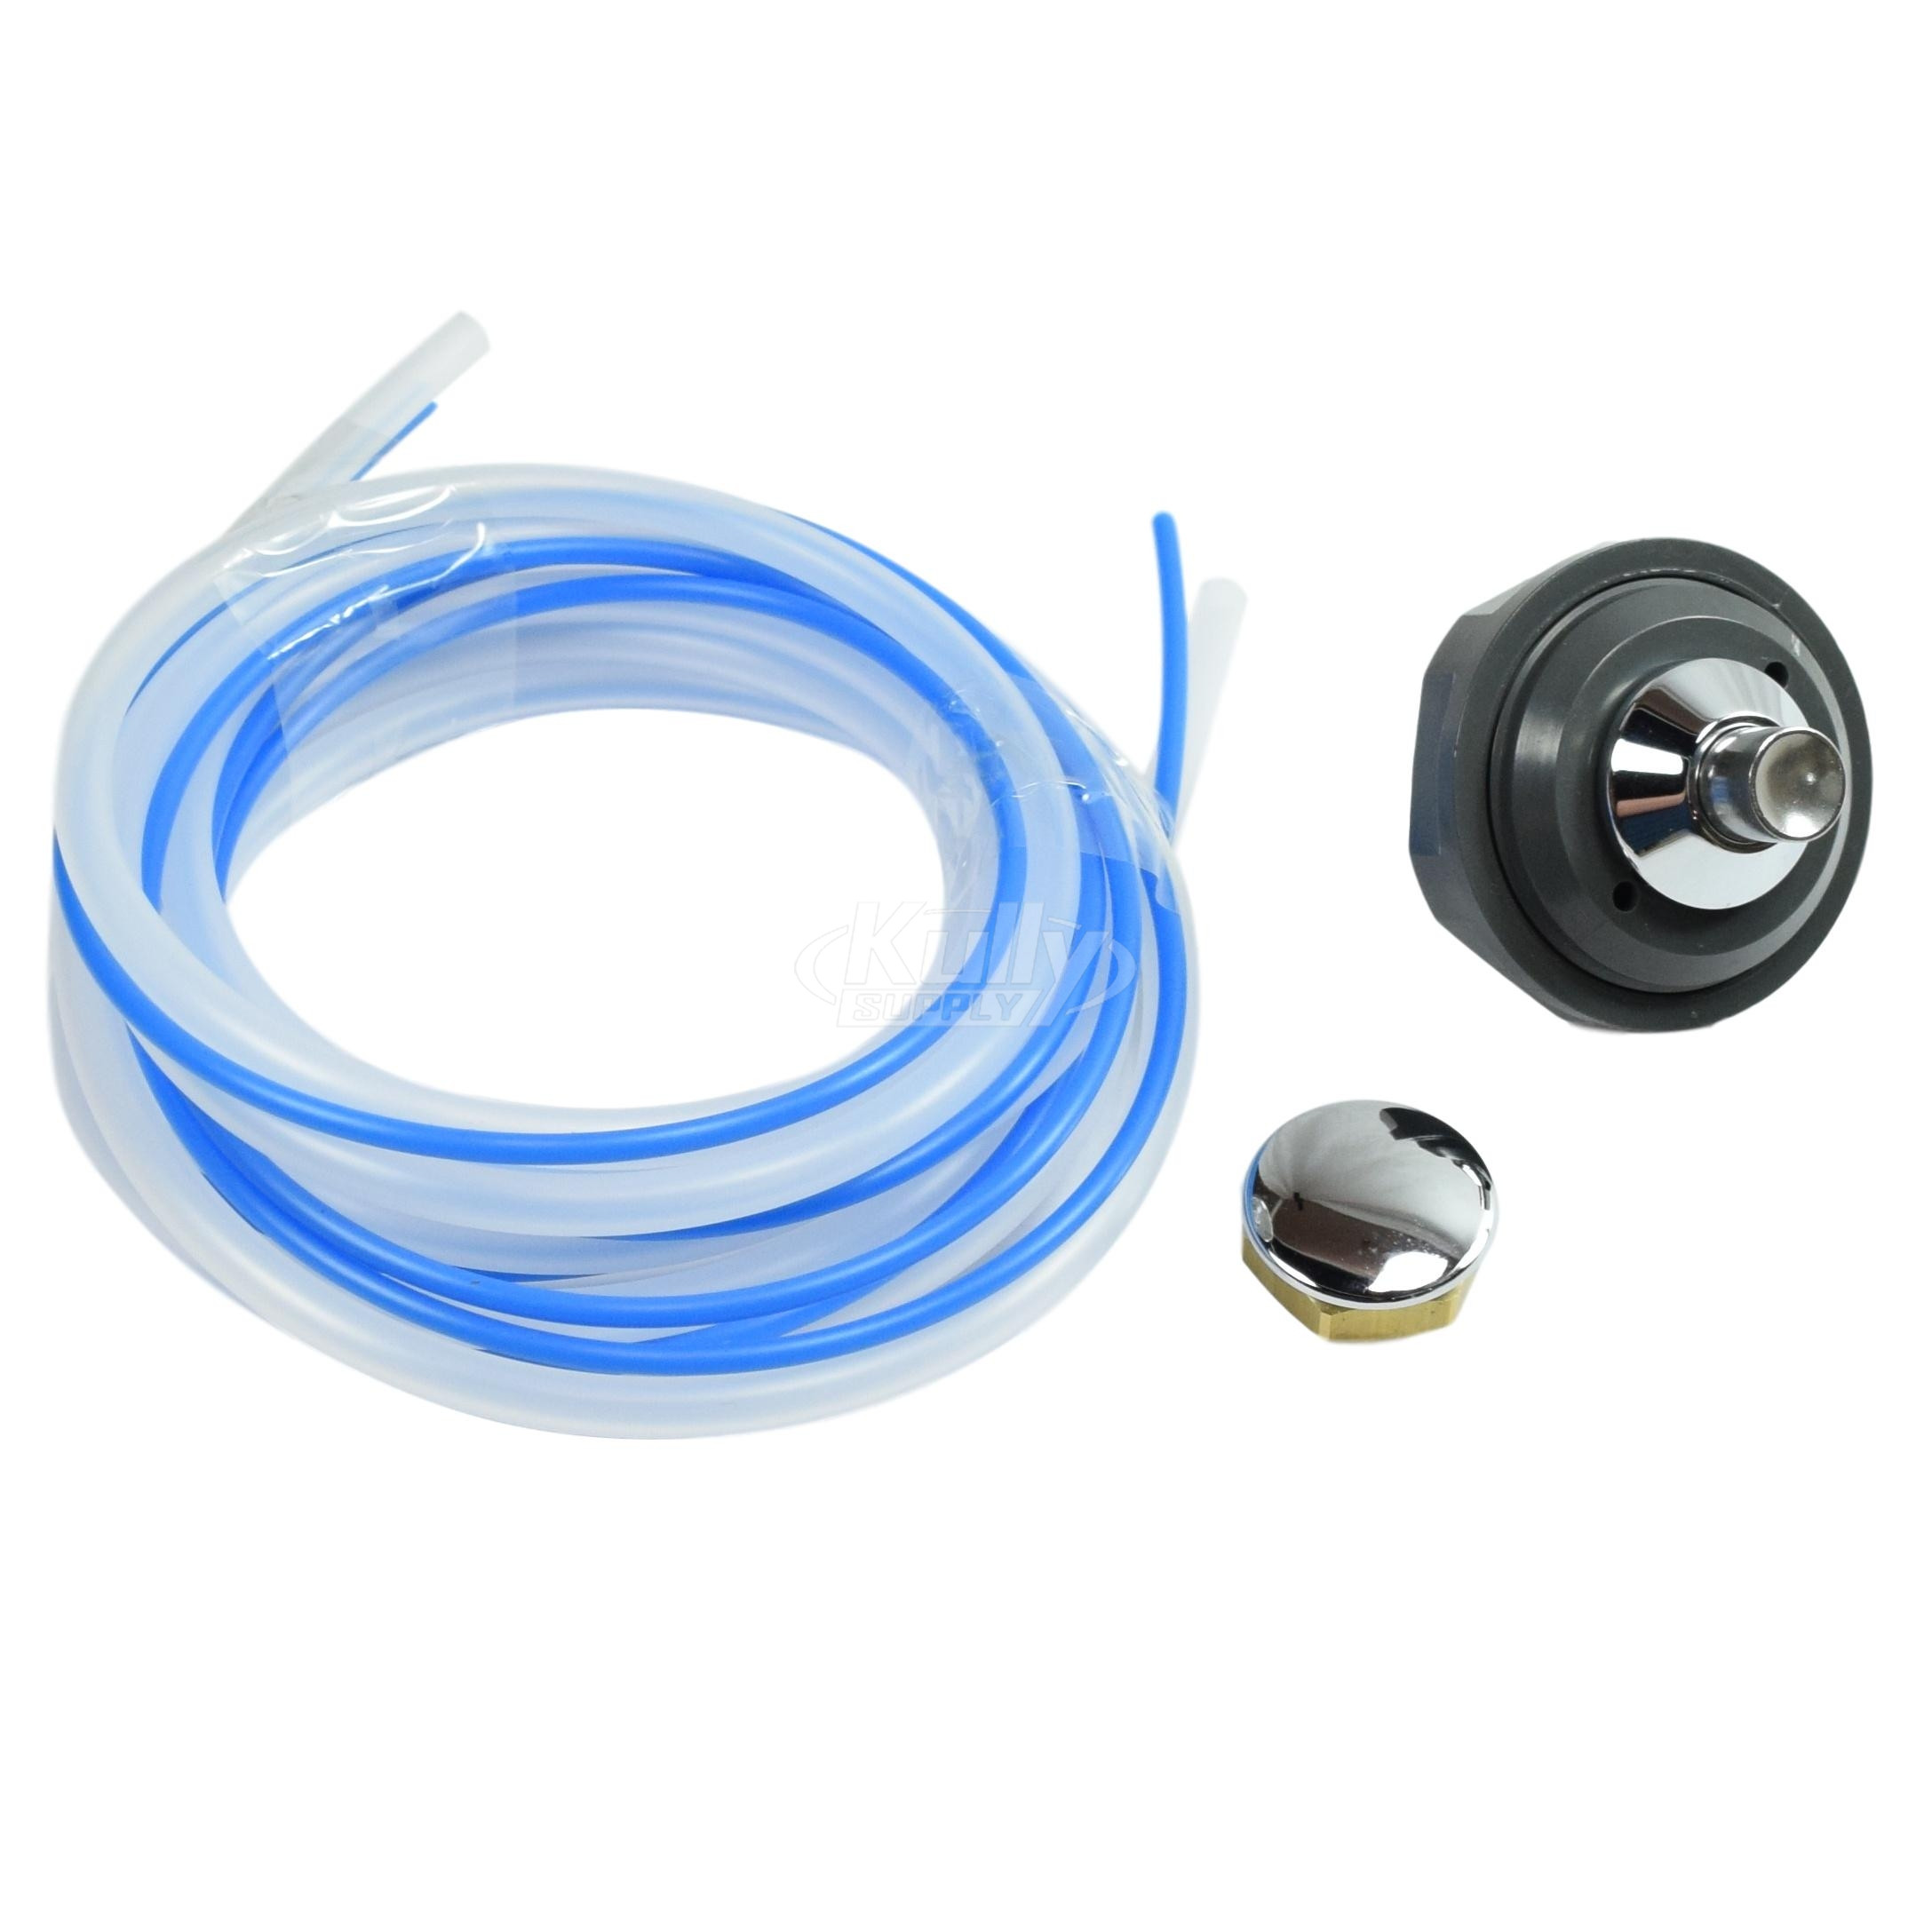 Acorn 4016-101-001 Single-Temp Pushbutton Assembly With Tubing For Air Control